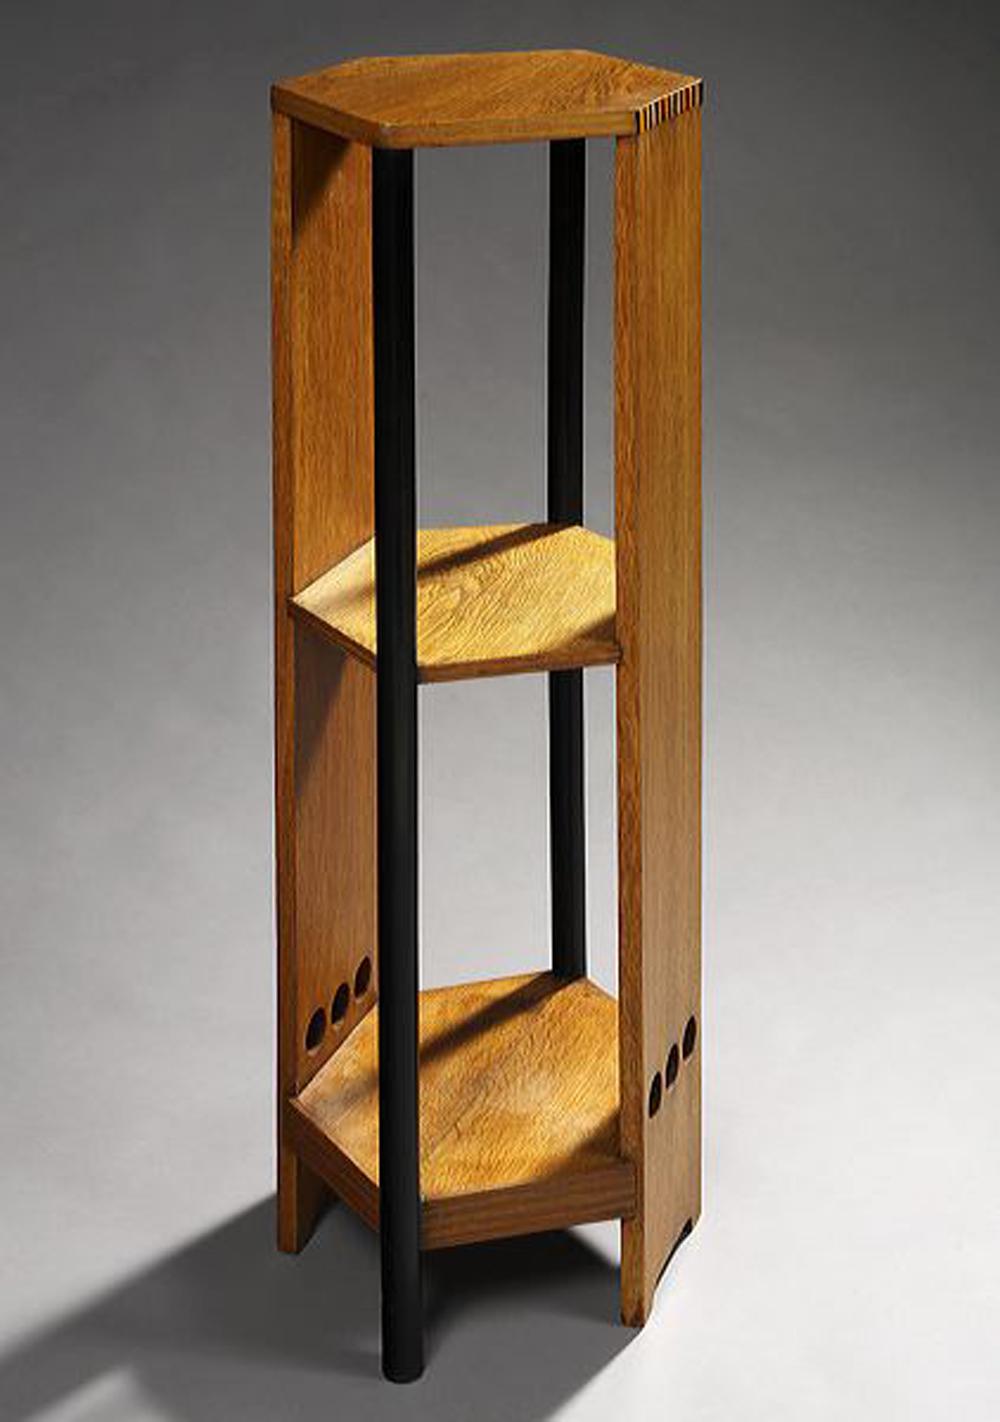 Hexagonal in shape with solid lateral posts decorated at the top with blackened wooden stripes and at the bottom with three open circles.
It is equipped with three shelves connected by two cylindrical uprights also in blackened wood.